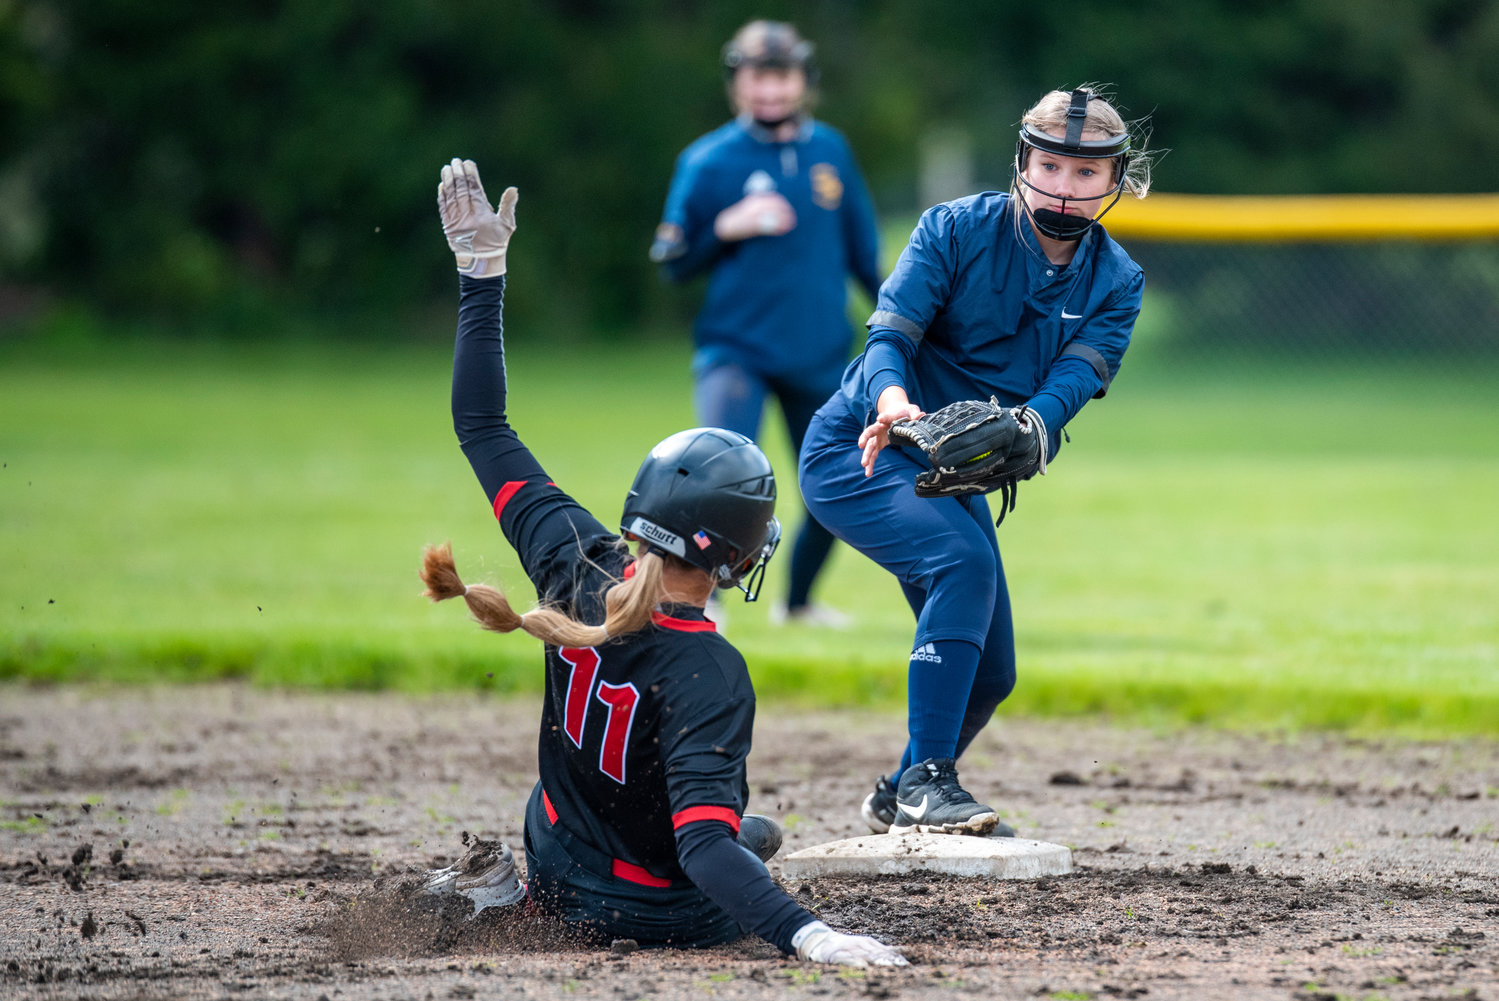 Mossyrock's Hailey Brooks (11) slides safely into second base for a steal against Naselle on May 9.